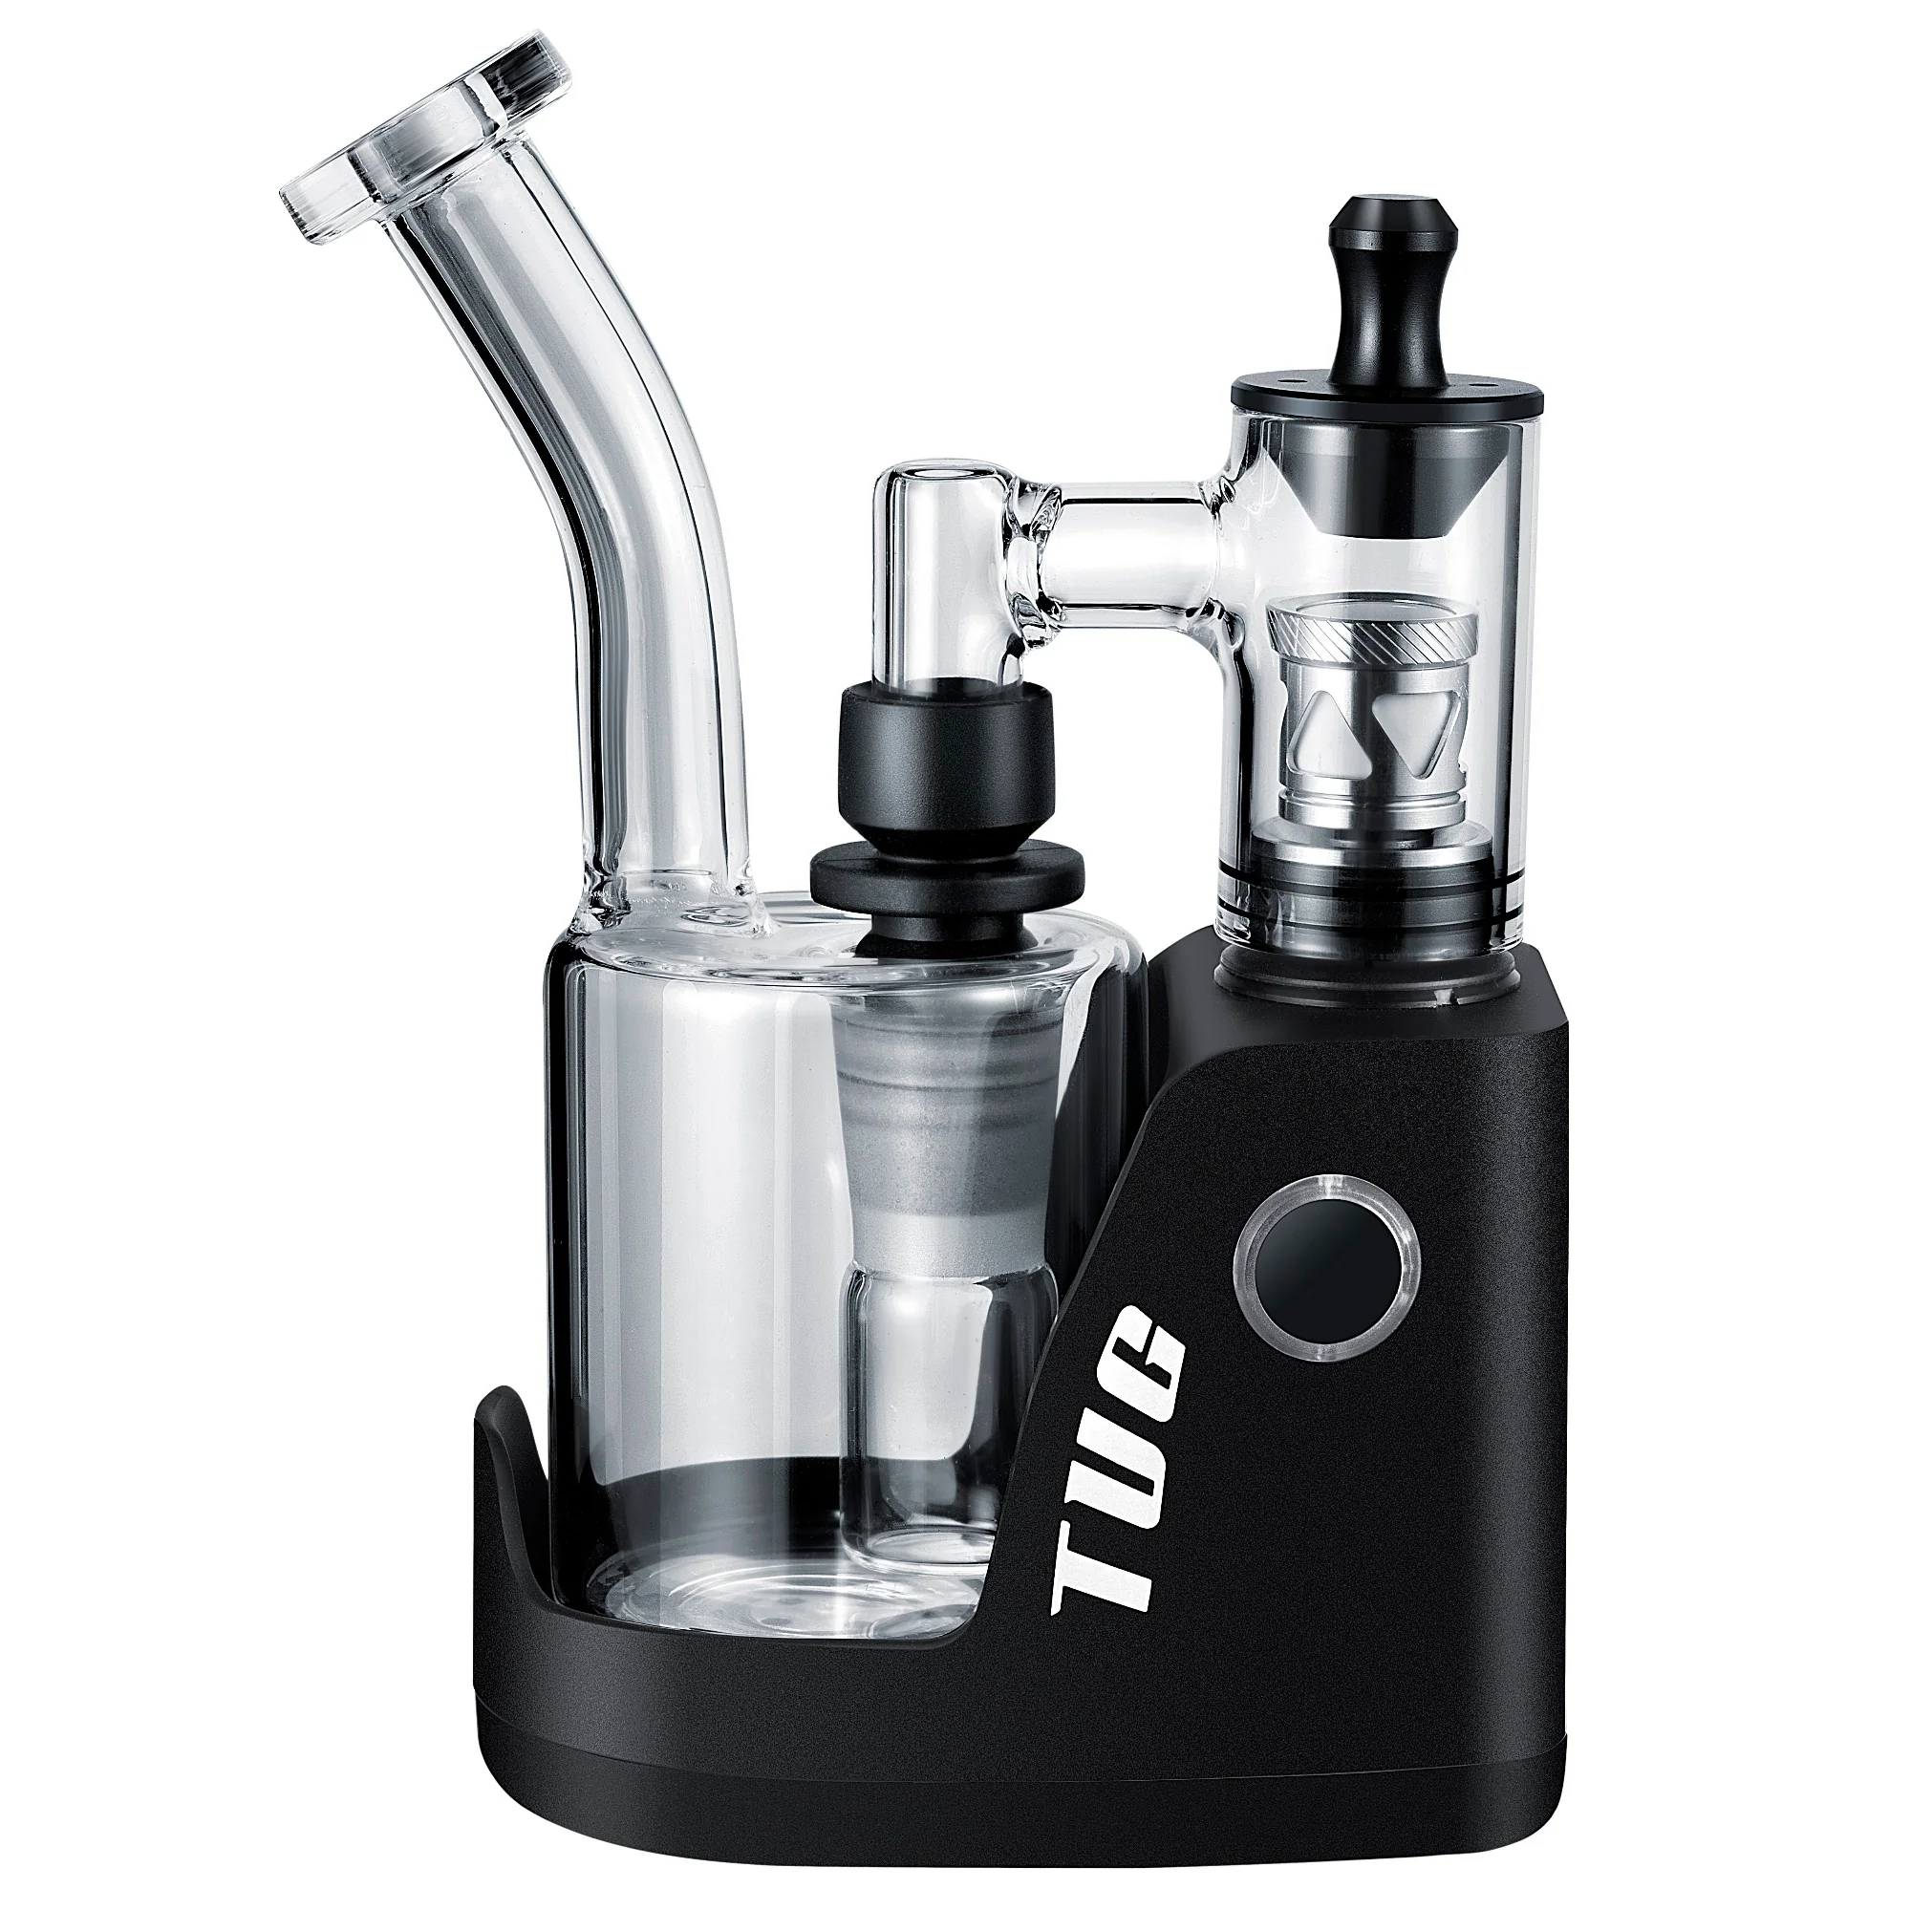 Crossing Tug E-Rig Kit Electric Dab Rig with 2700mAh Battery & Ceramic 3D Heated Chamber